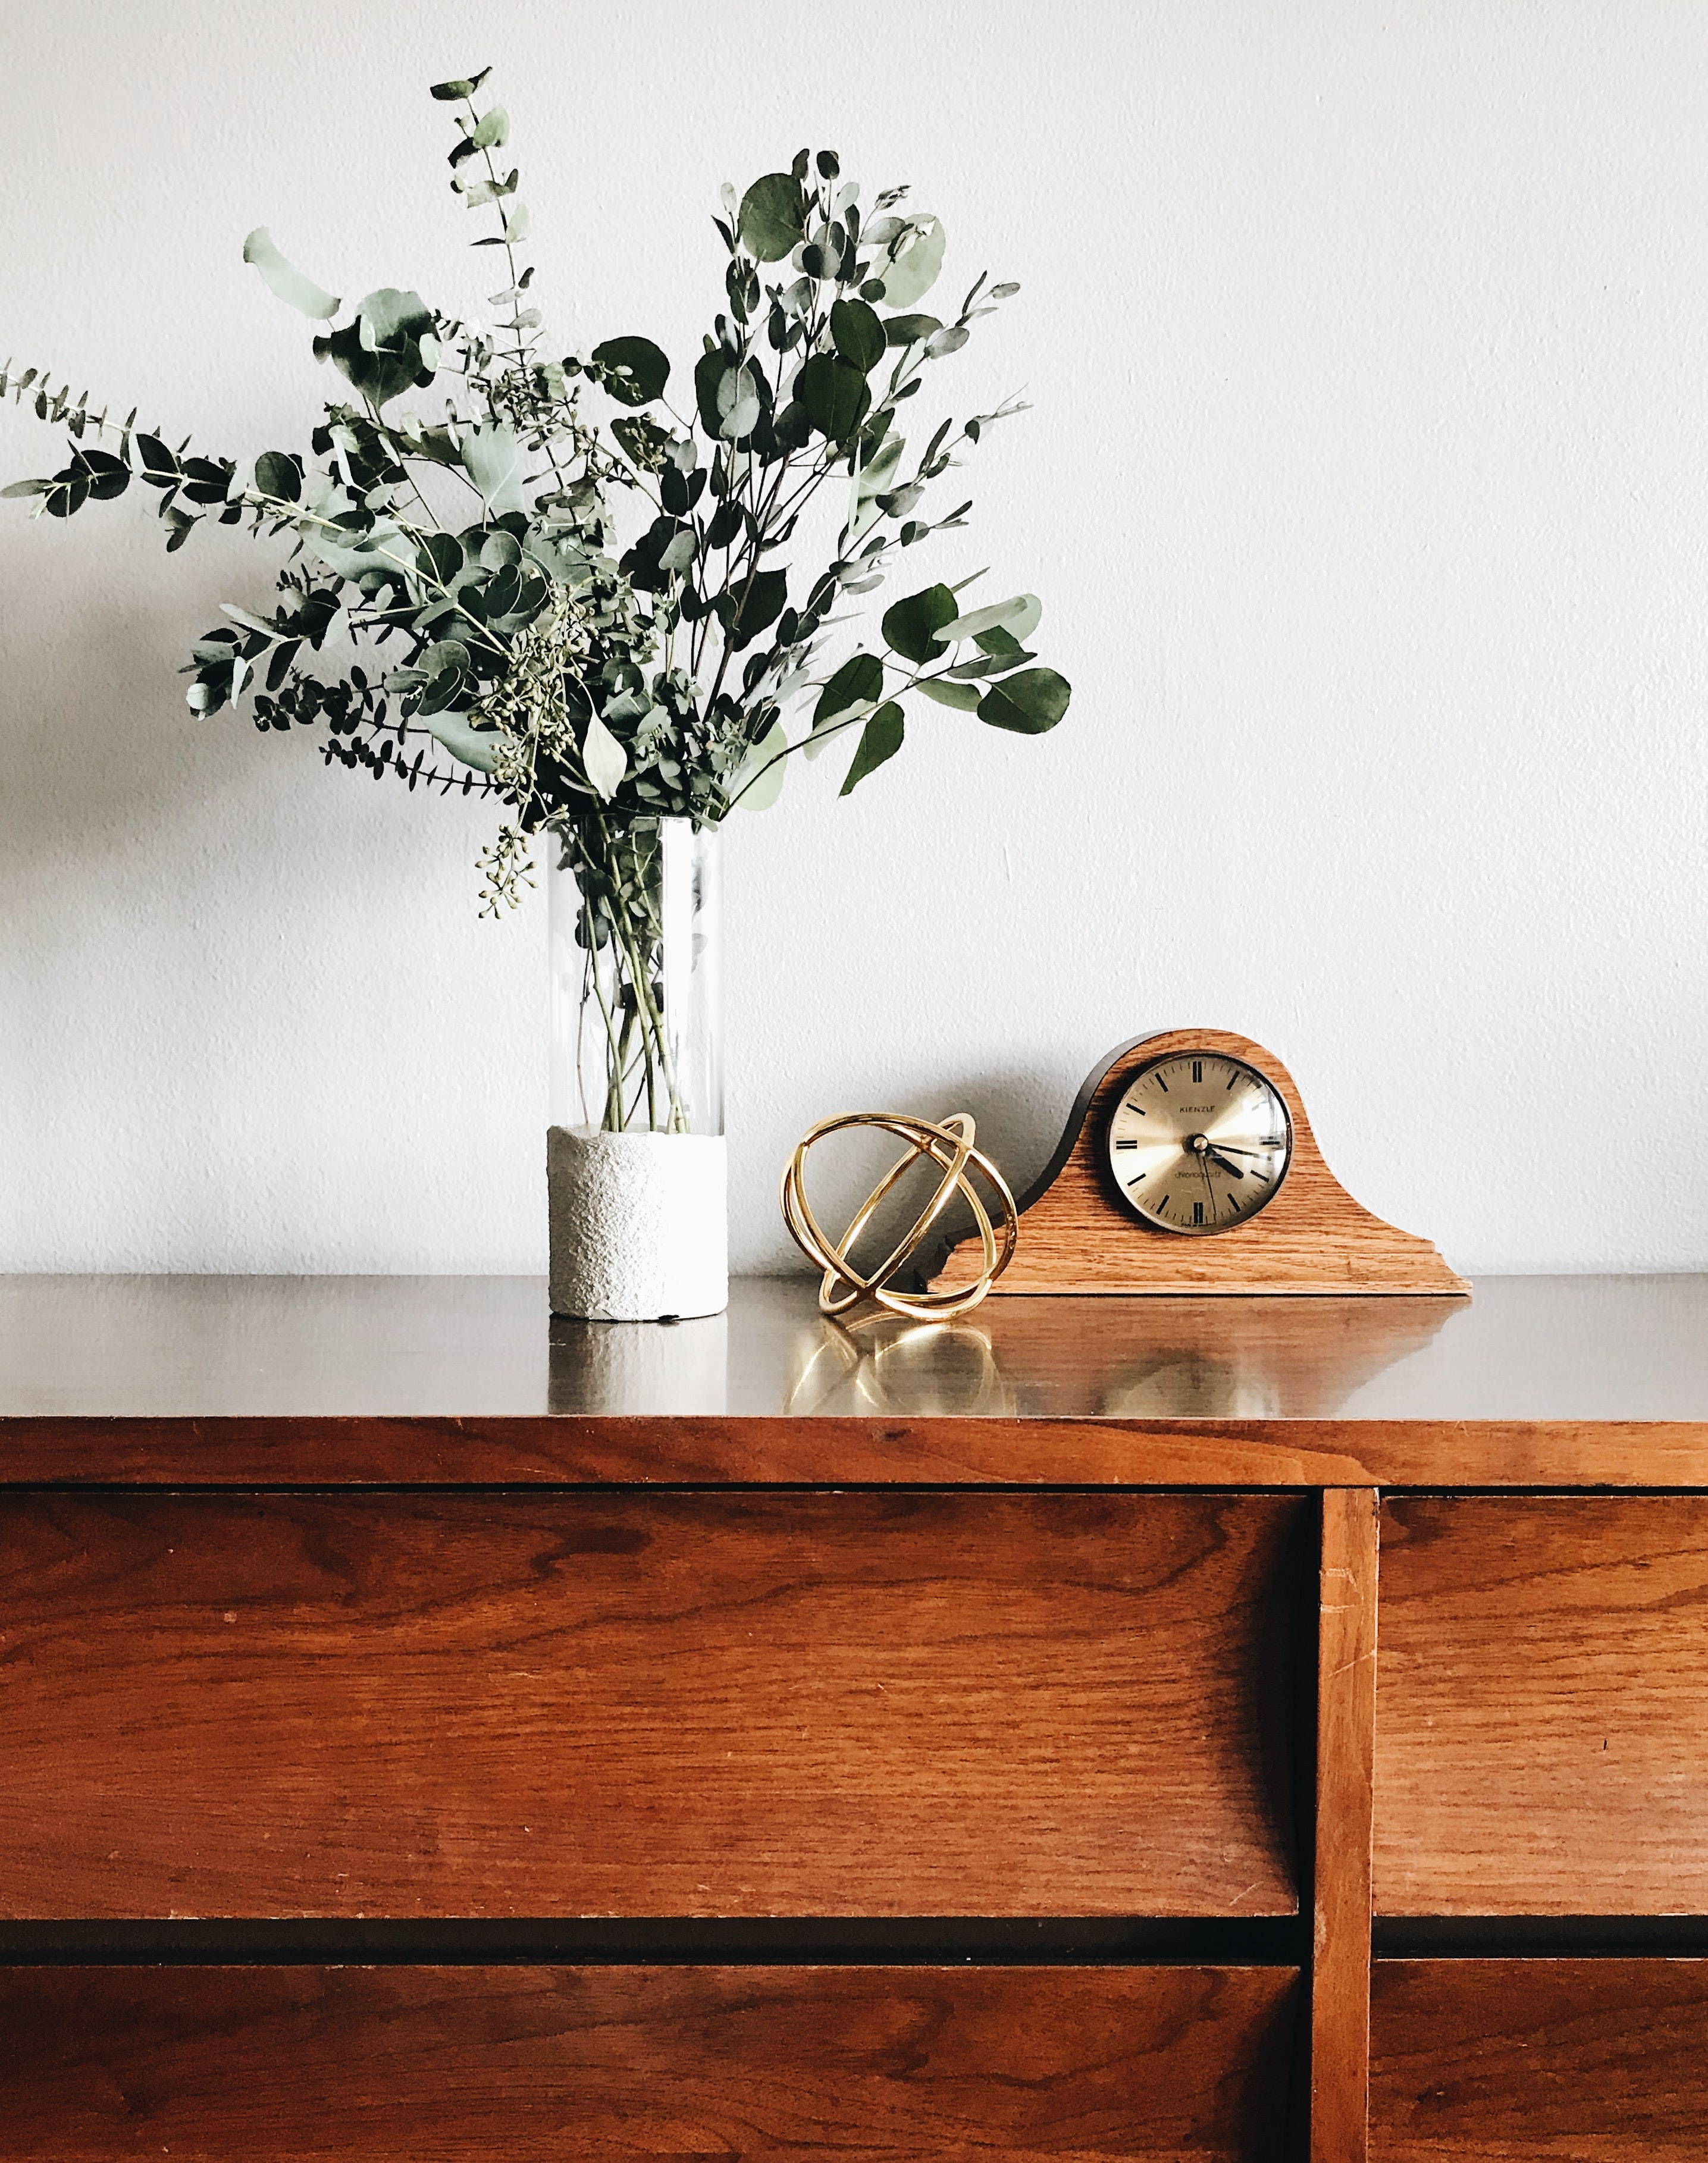 Light brown wooden dresser. There is a vase with greenery, a sculpture, and a vintage-looking table clock on the dresser.